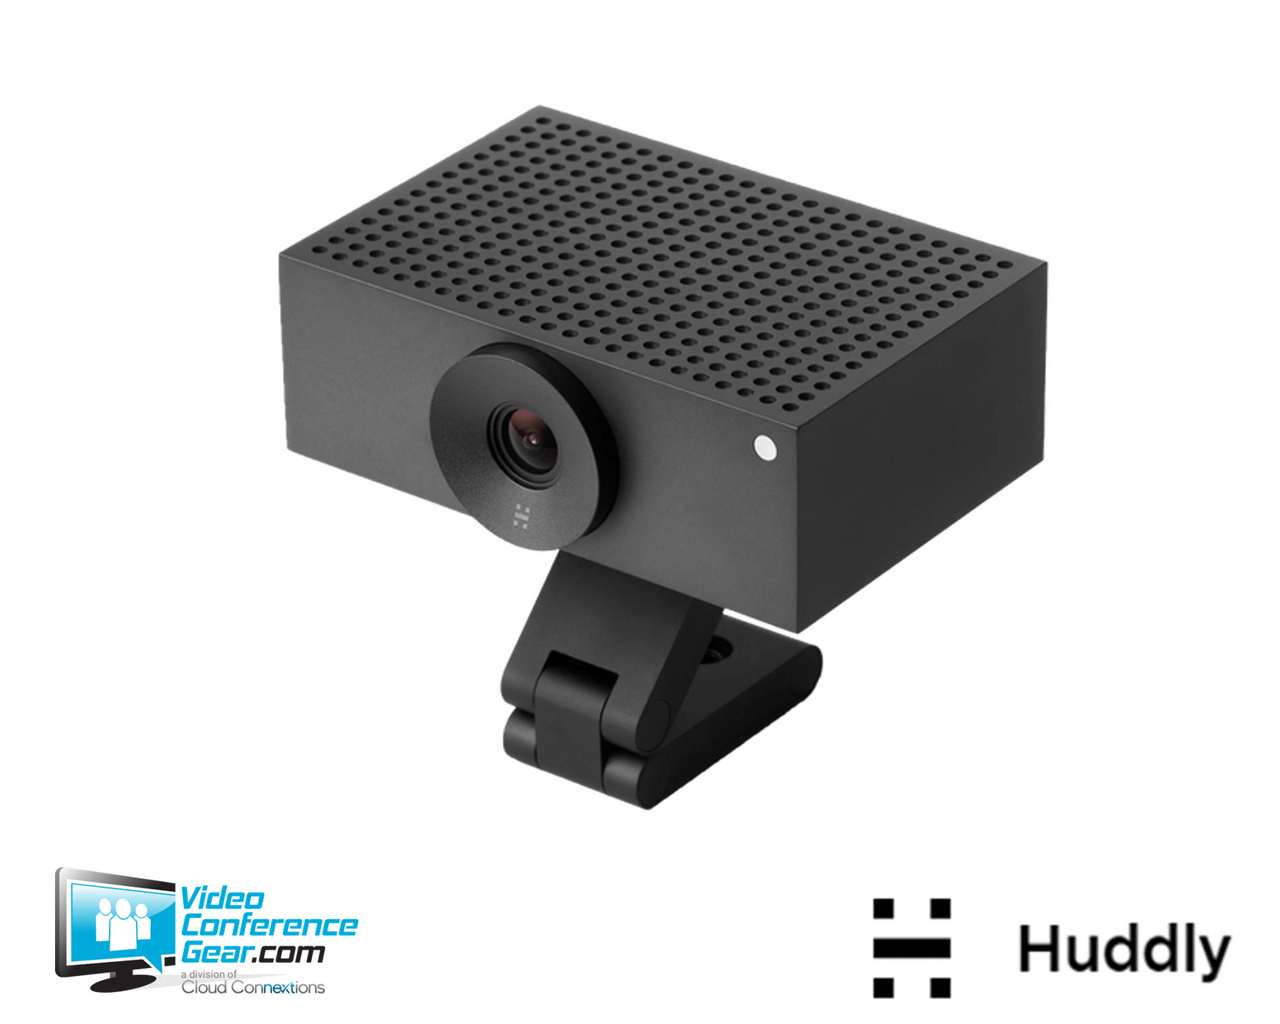 Huddly S1 Small Conference Room Video Conferencing Camera with 120˚ Field of View 7090043790764